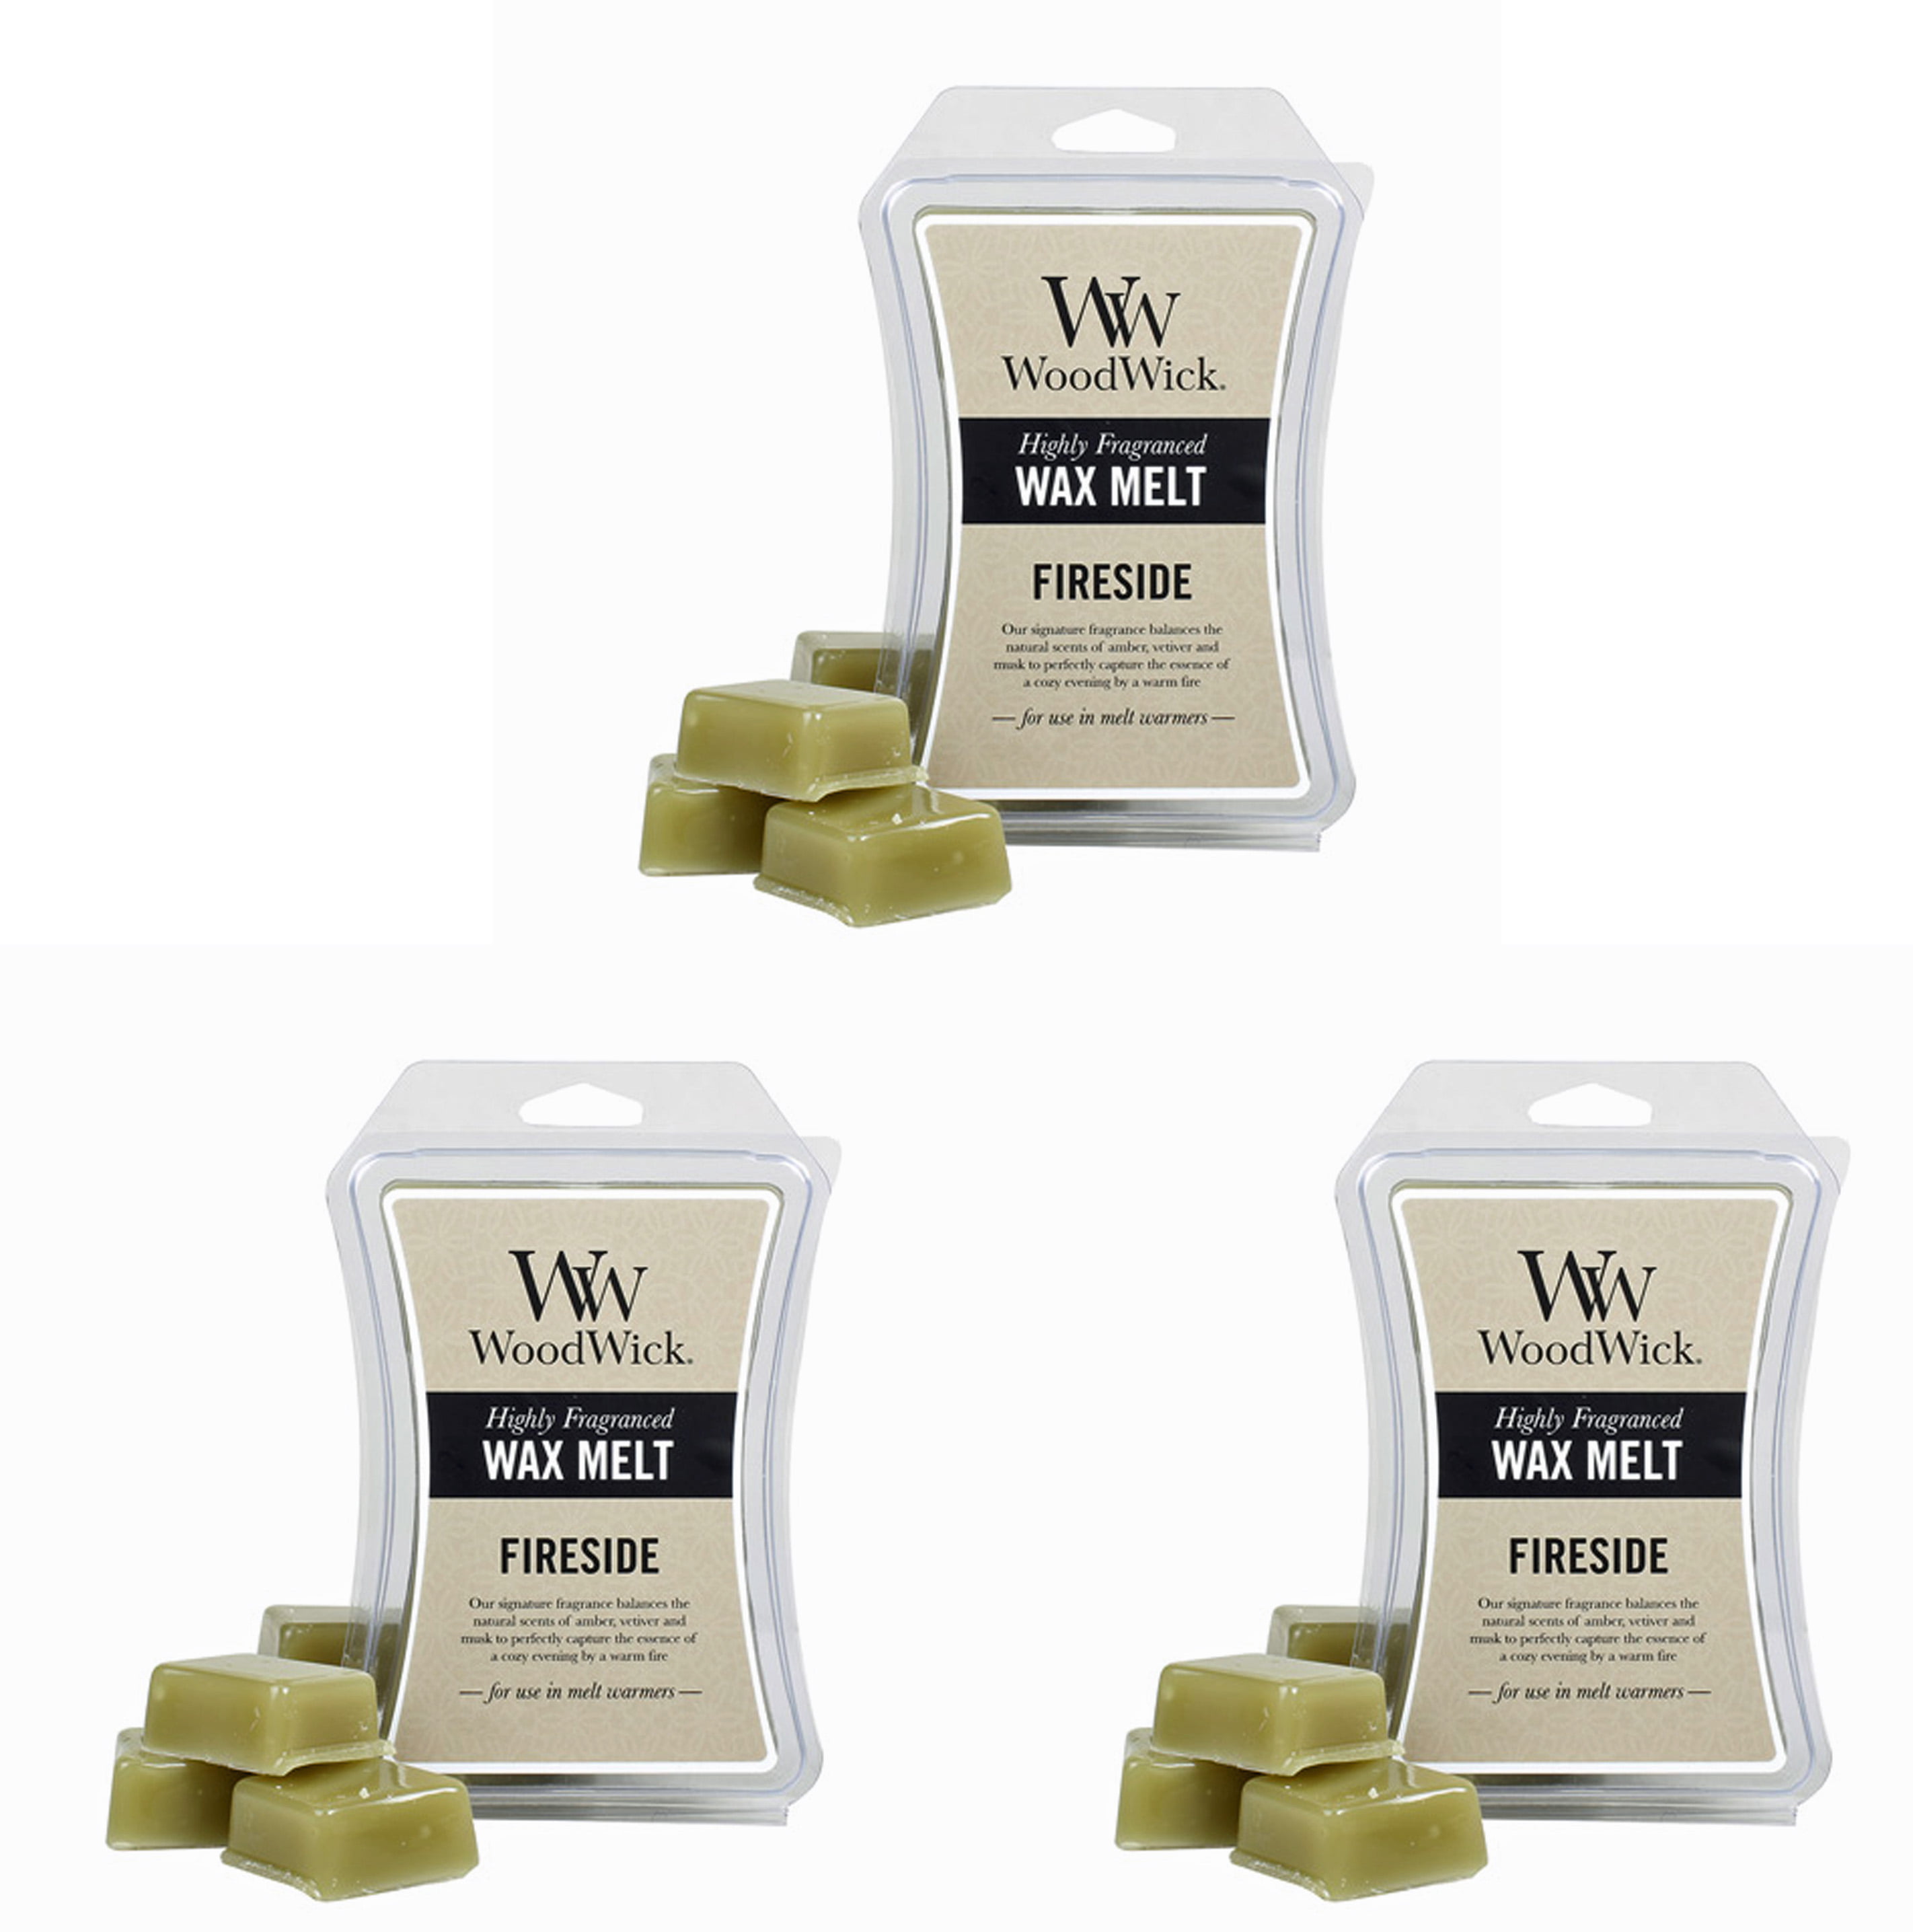 10x Yankee Candle Wax Tart Melts Please see list of fragrances you will receive 